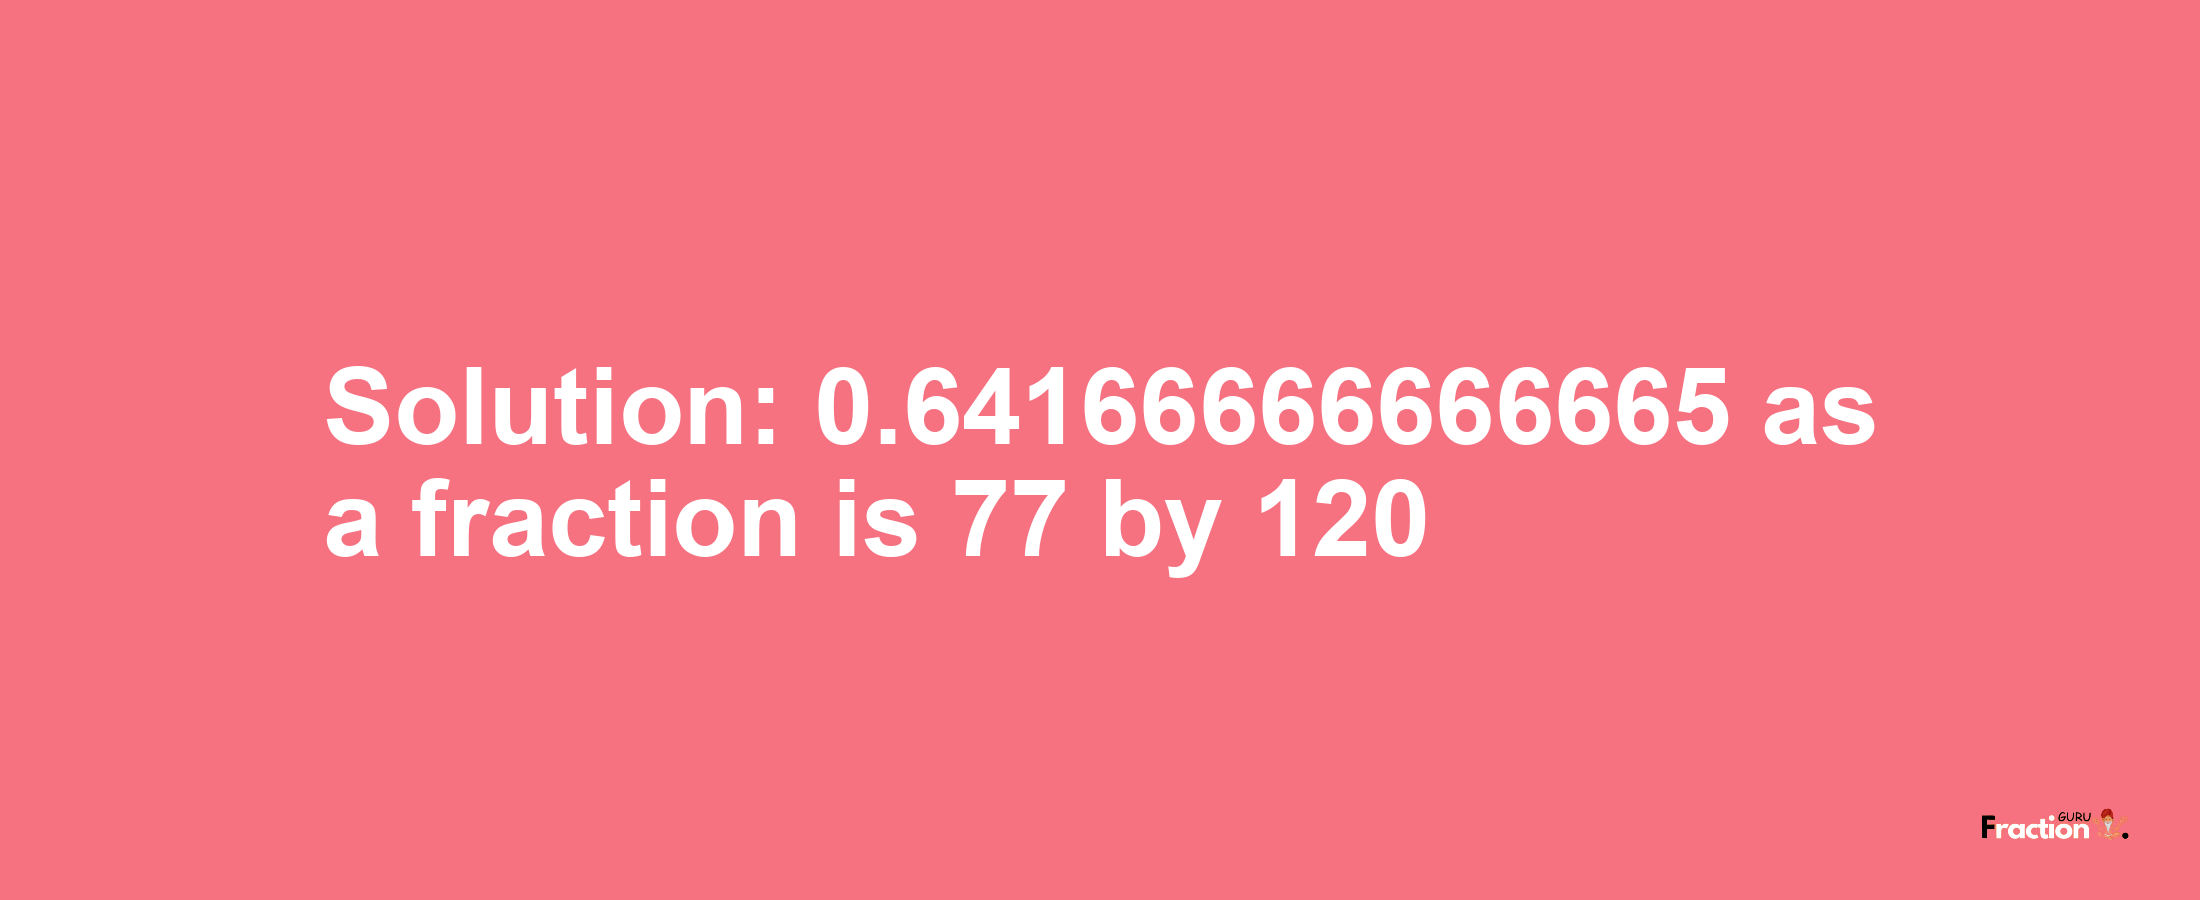 Solution:0.64166666666665 as a fraction is 77/120